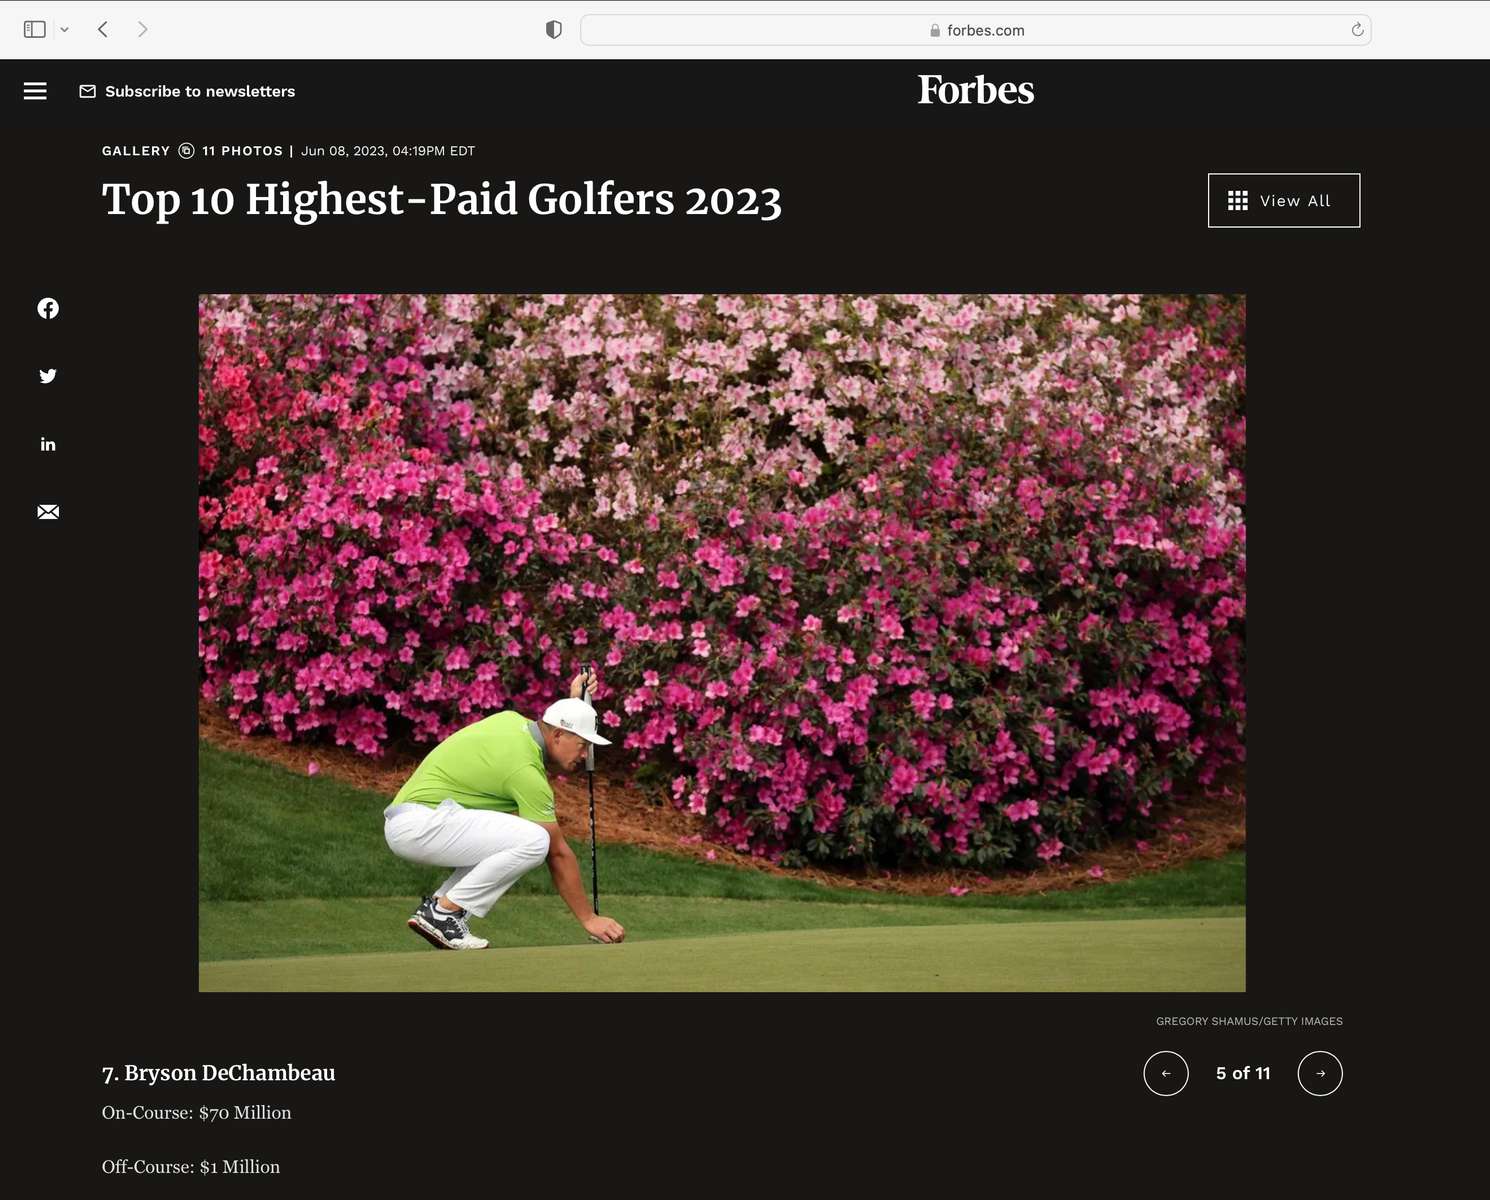 A photo gallery on the Top 10 Highest Paid Golfers + an ancillary piece  | Photo research + edit for Forbes, 2023